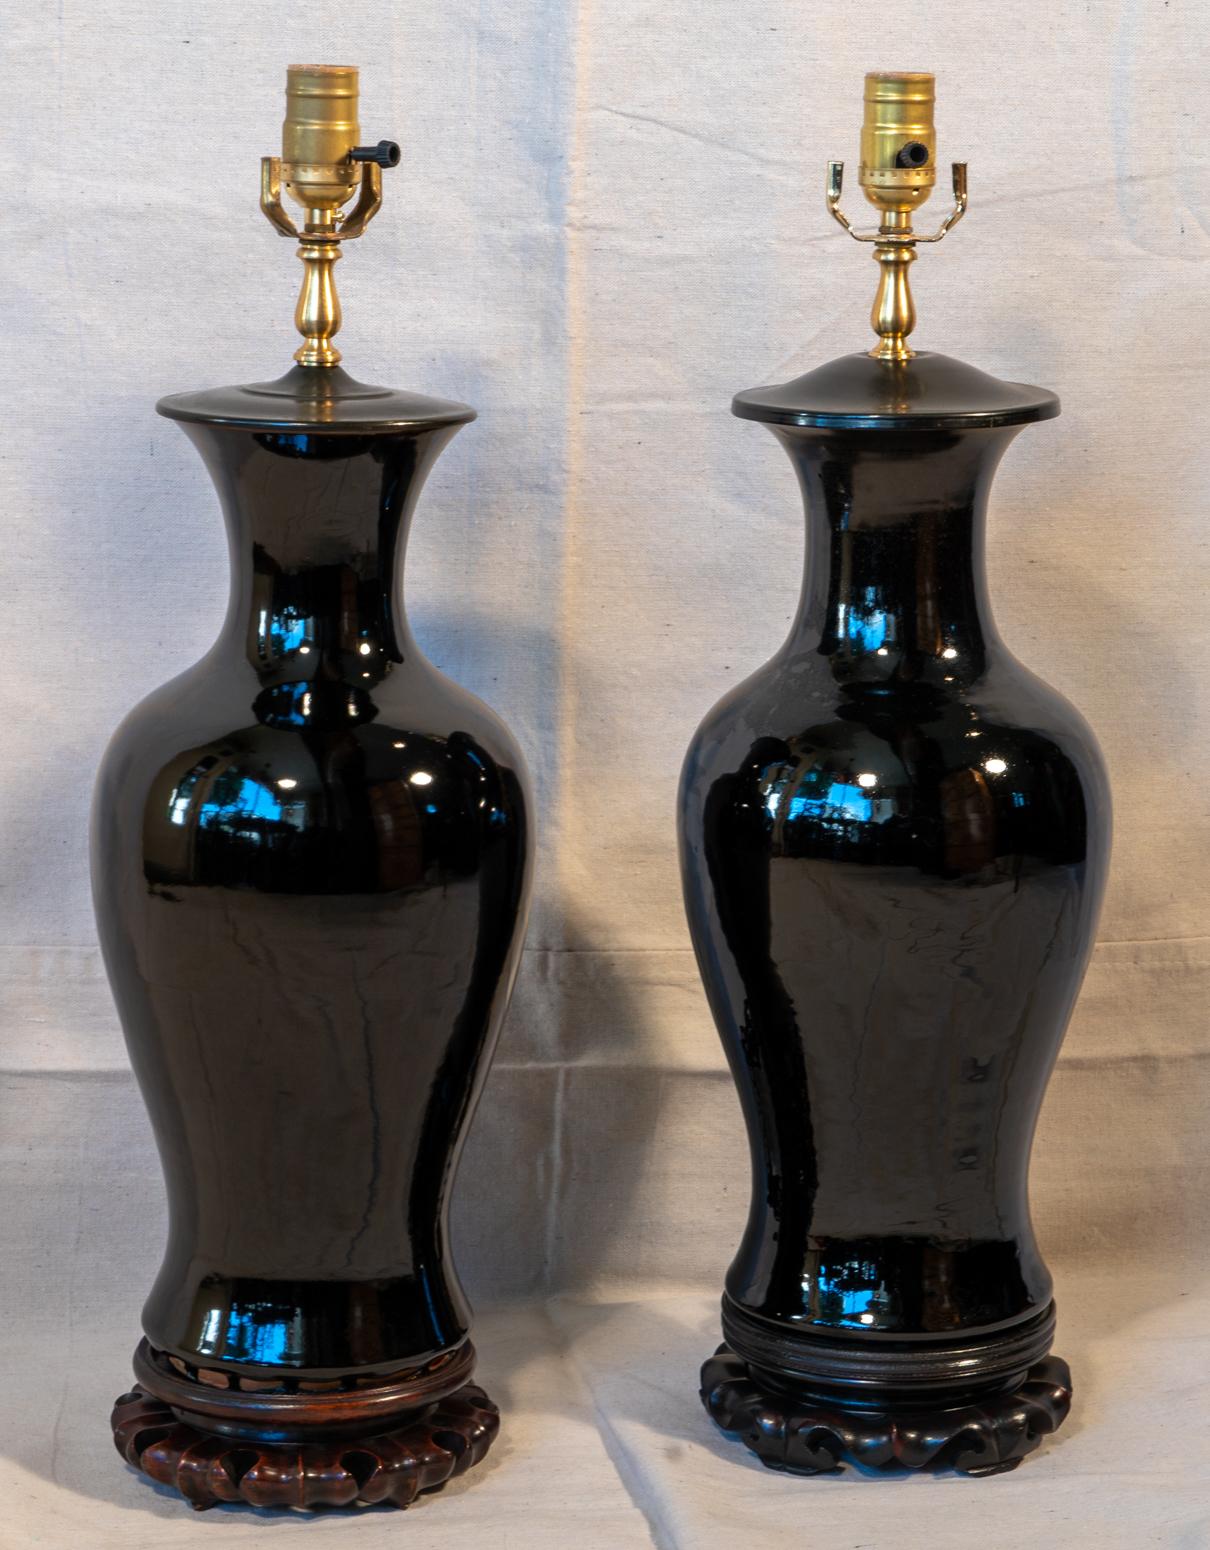 Associated pair of 19th century Chinese porcelain mirror black lamps, circa 1880
Baluster Classic form. Both on old hardwood bases.
Two similar age, form and quality vases and bases as lamps.